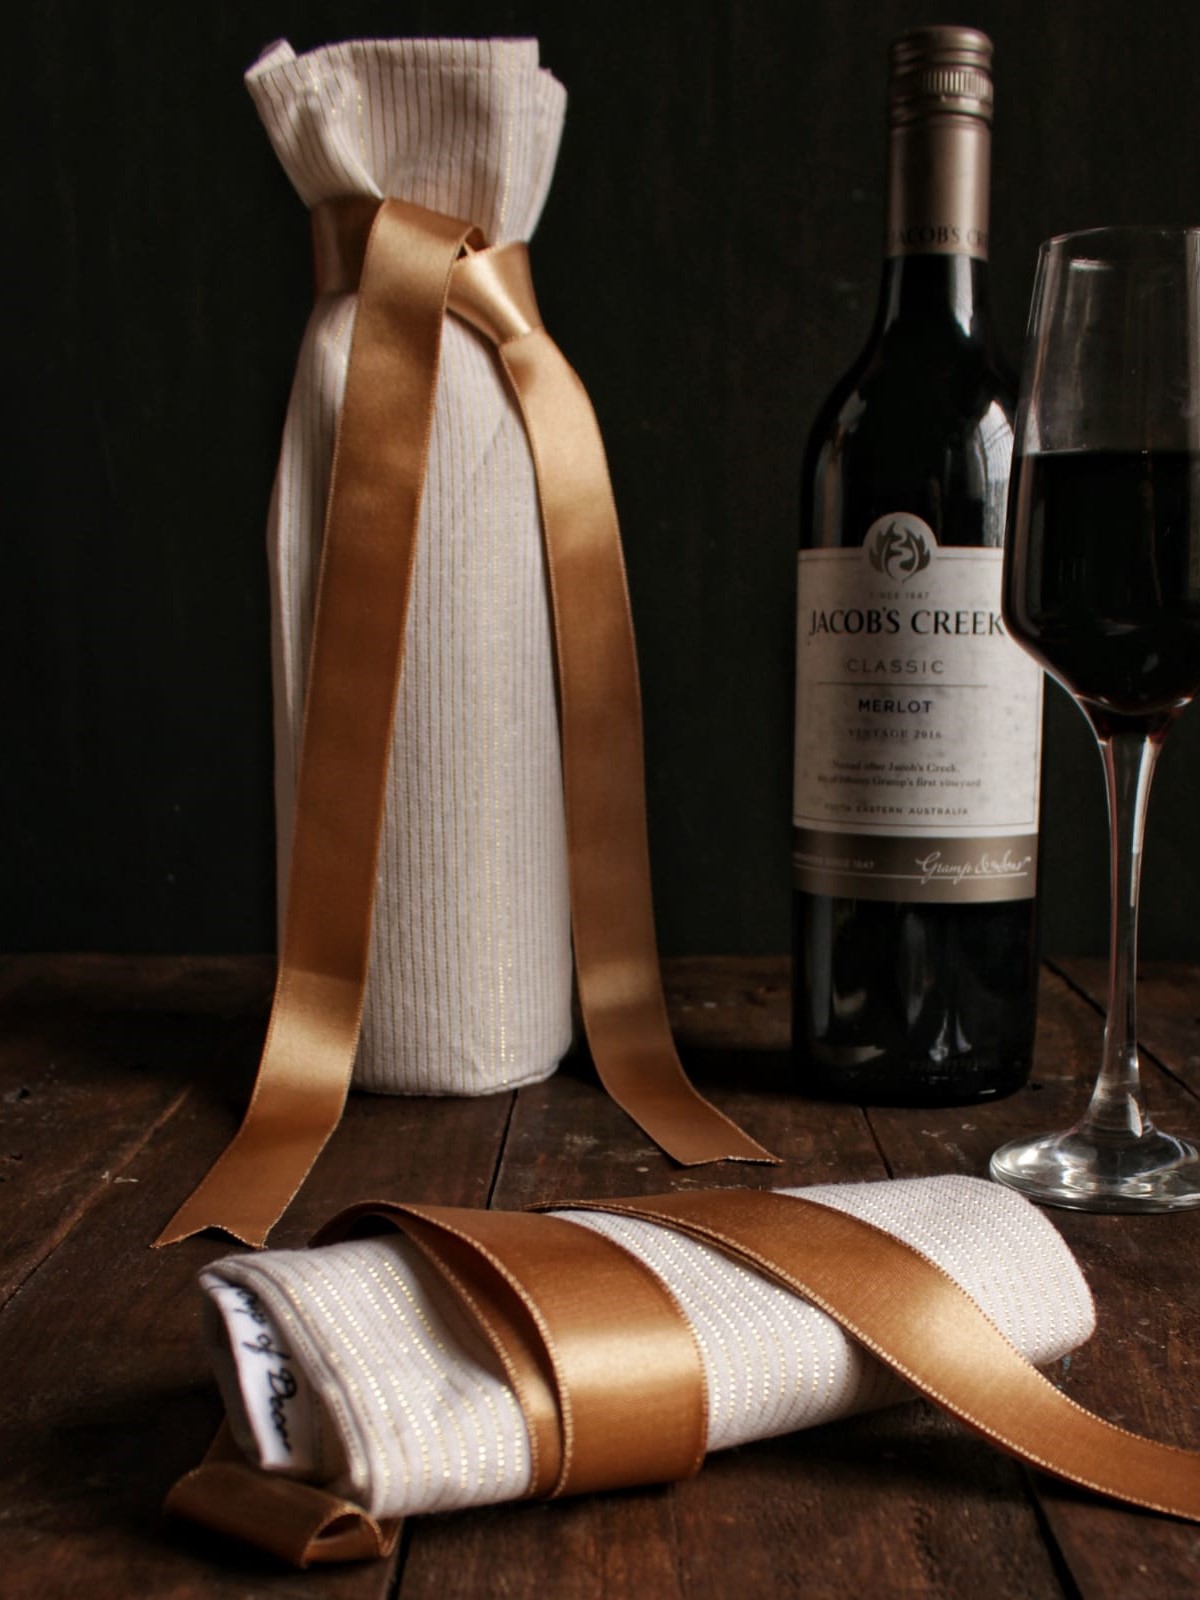 Wine Bottle Cover - Off-white and gold themed